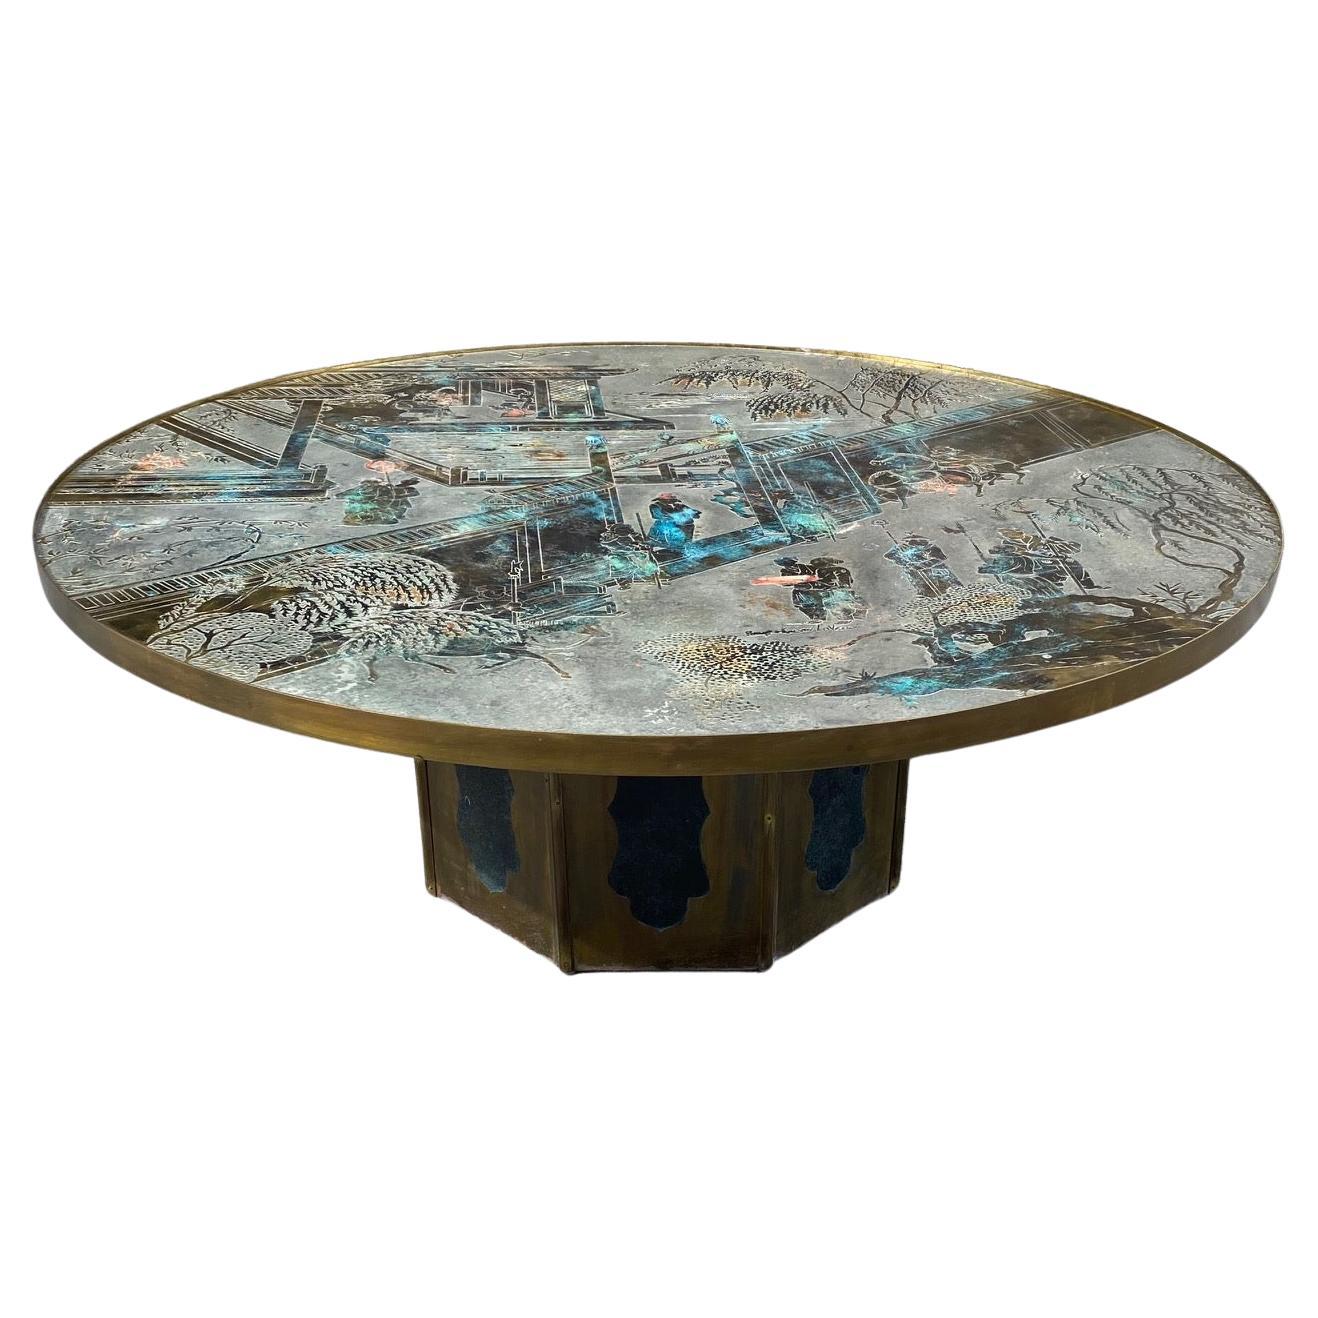 Acid Etched & Patinated Brass "Chan" Coffee Table by Philip and Kelvin Laverne